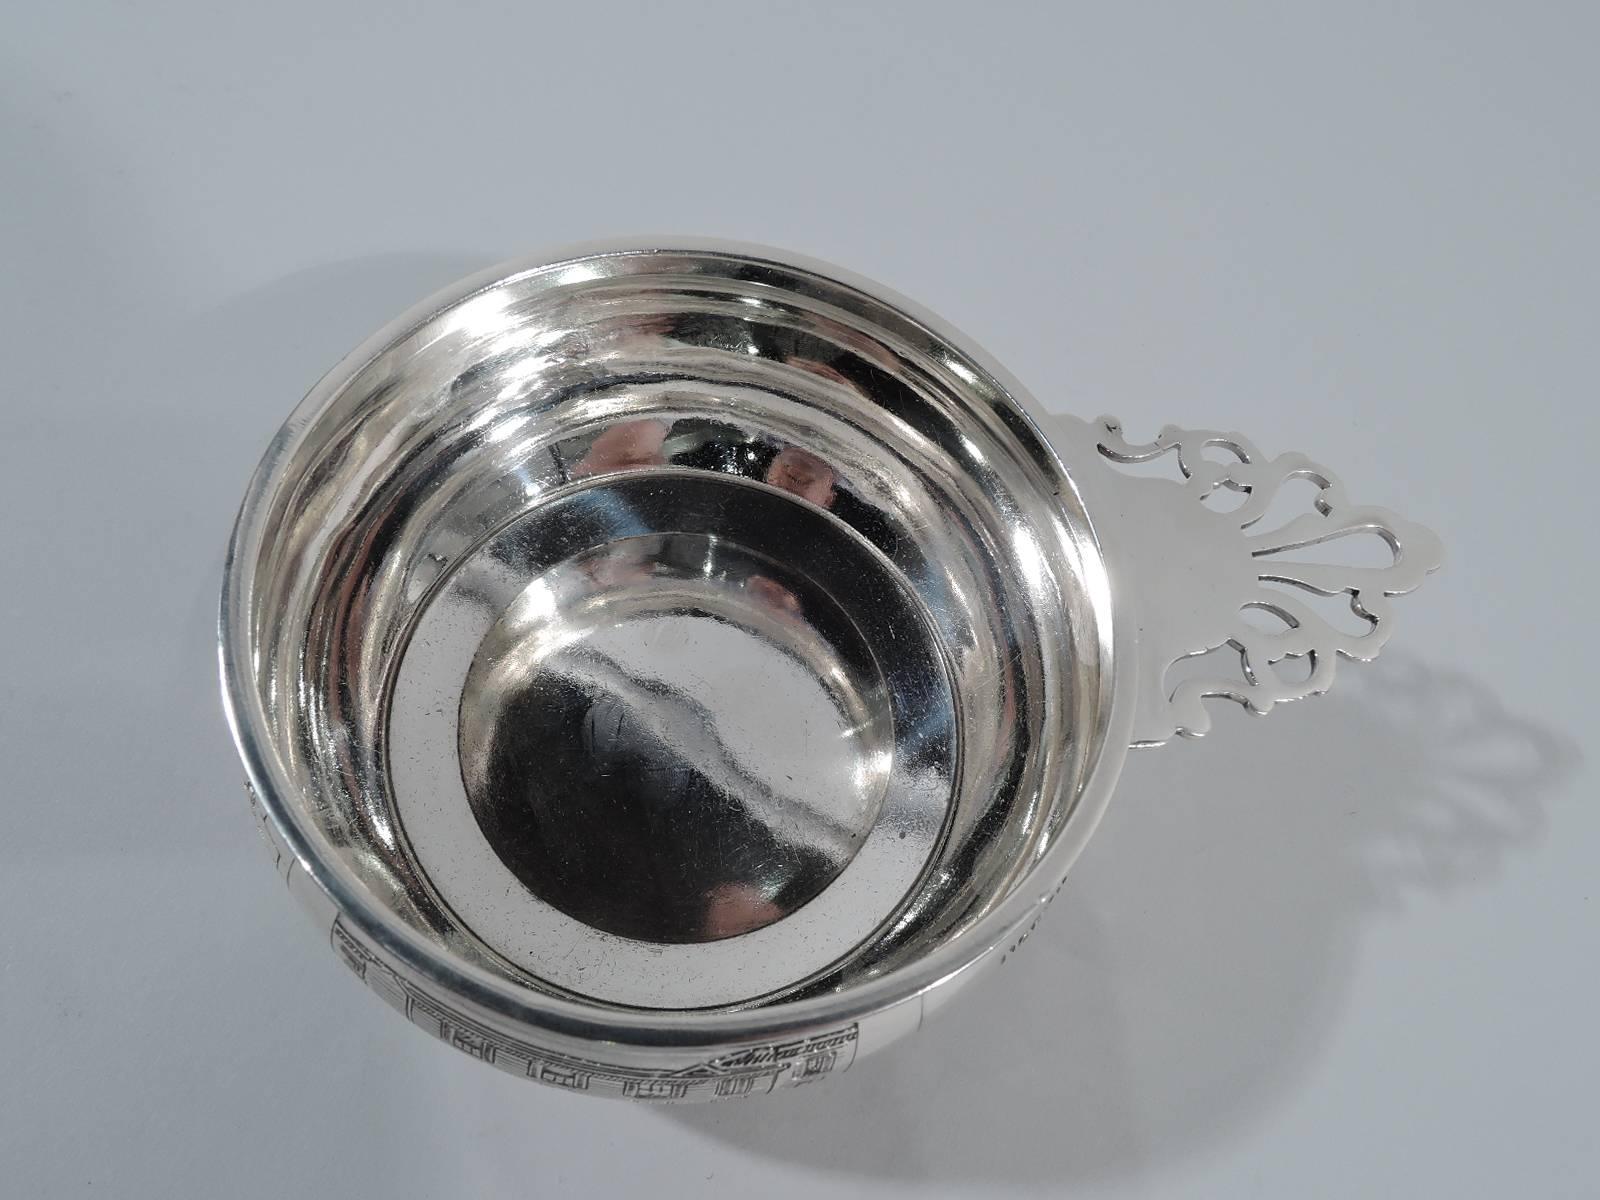 Sterling silver novelty porringer. Made by McChesney in Newark, circa 1910. Curved sides with acid-etched frames depicting the midnight ride of Paul Revere, when he announced “The British are coming.” Revere’s house, the North Church, and crossing